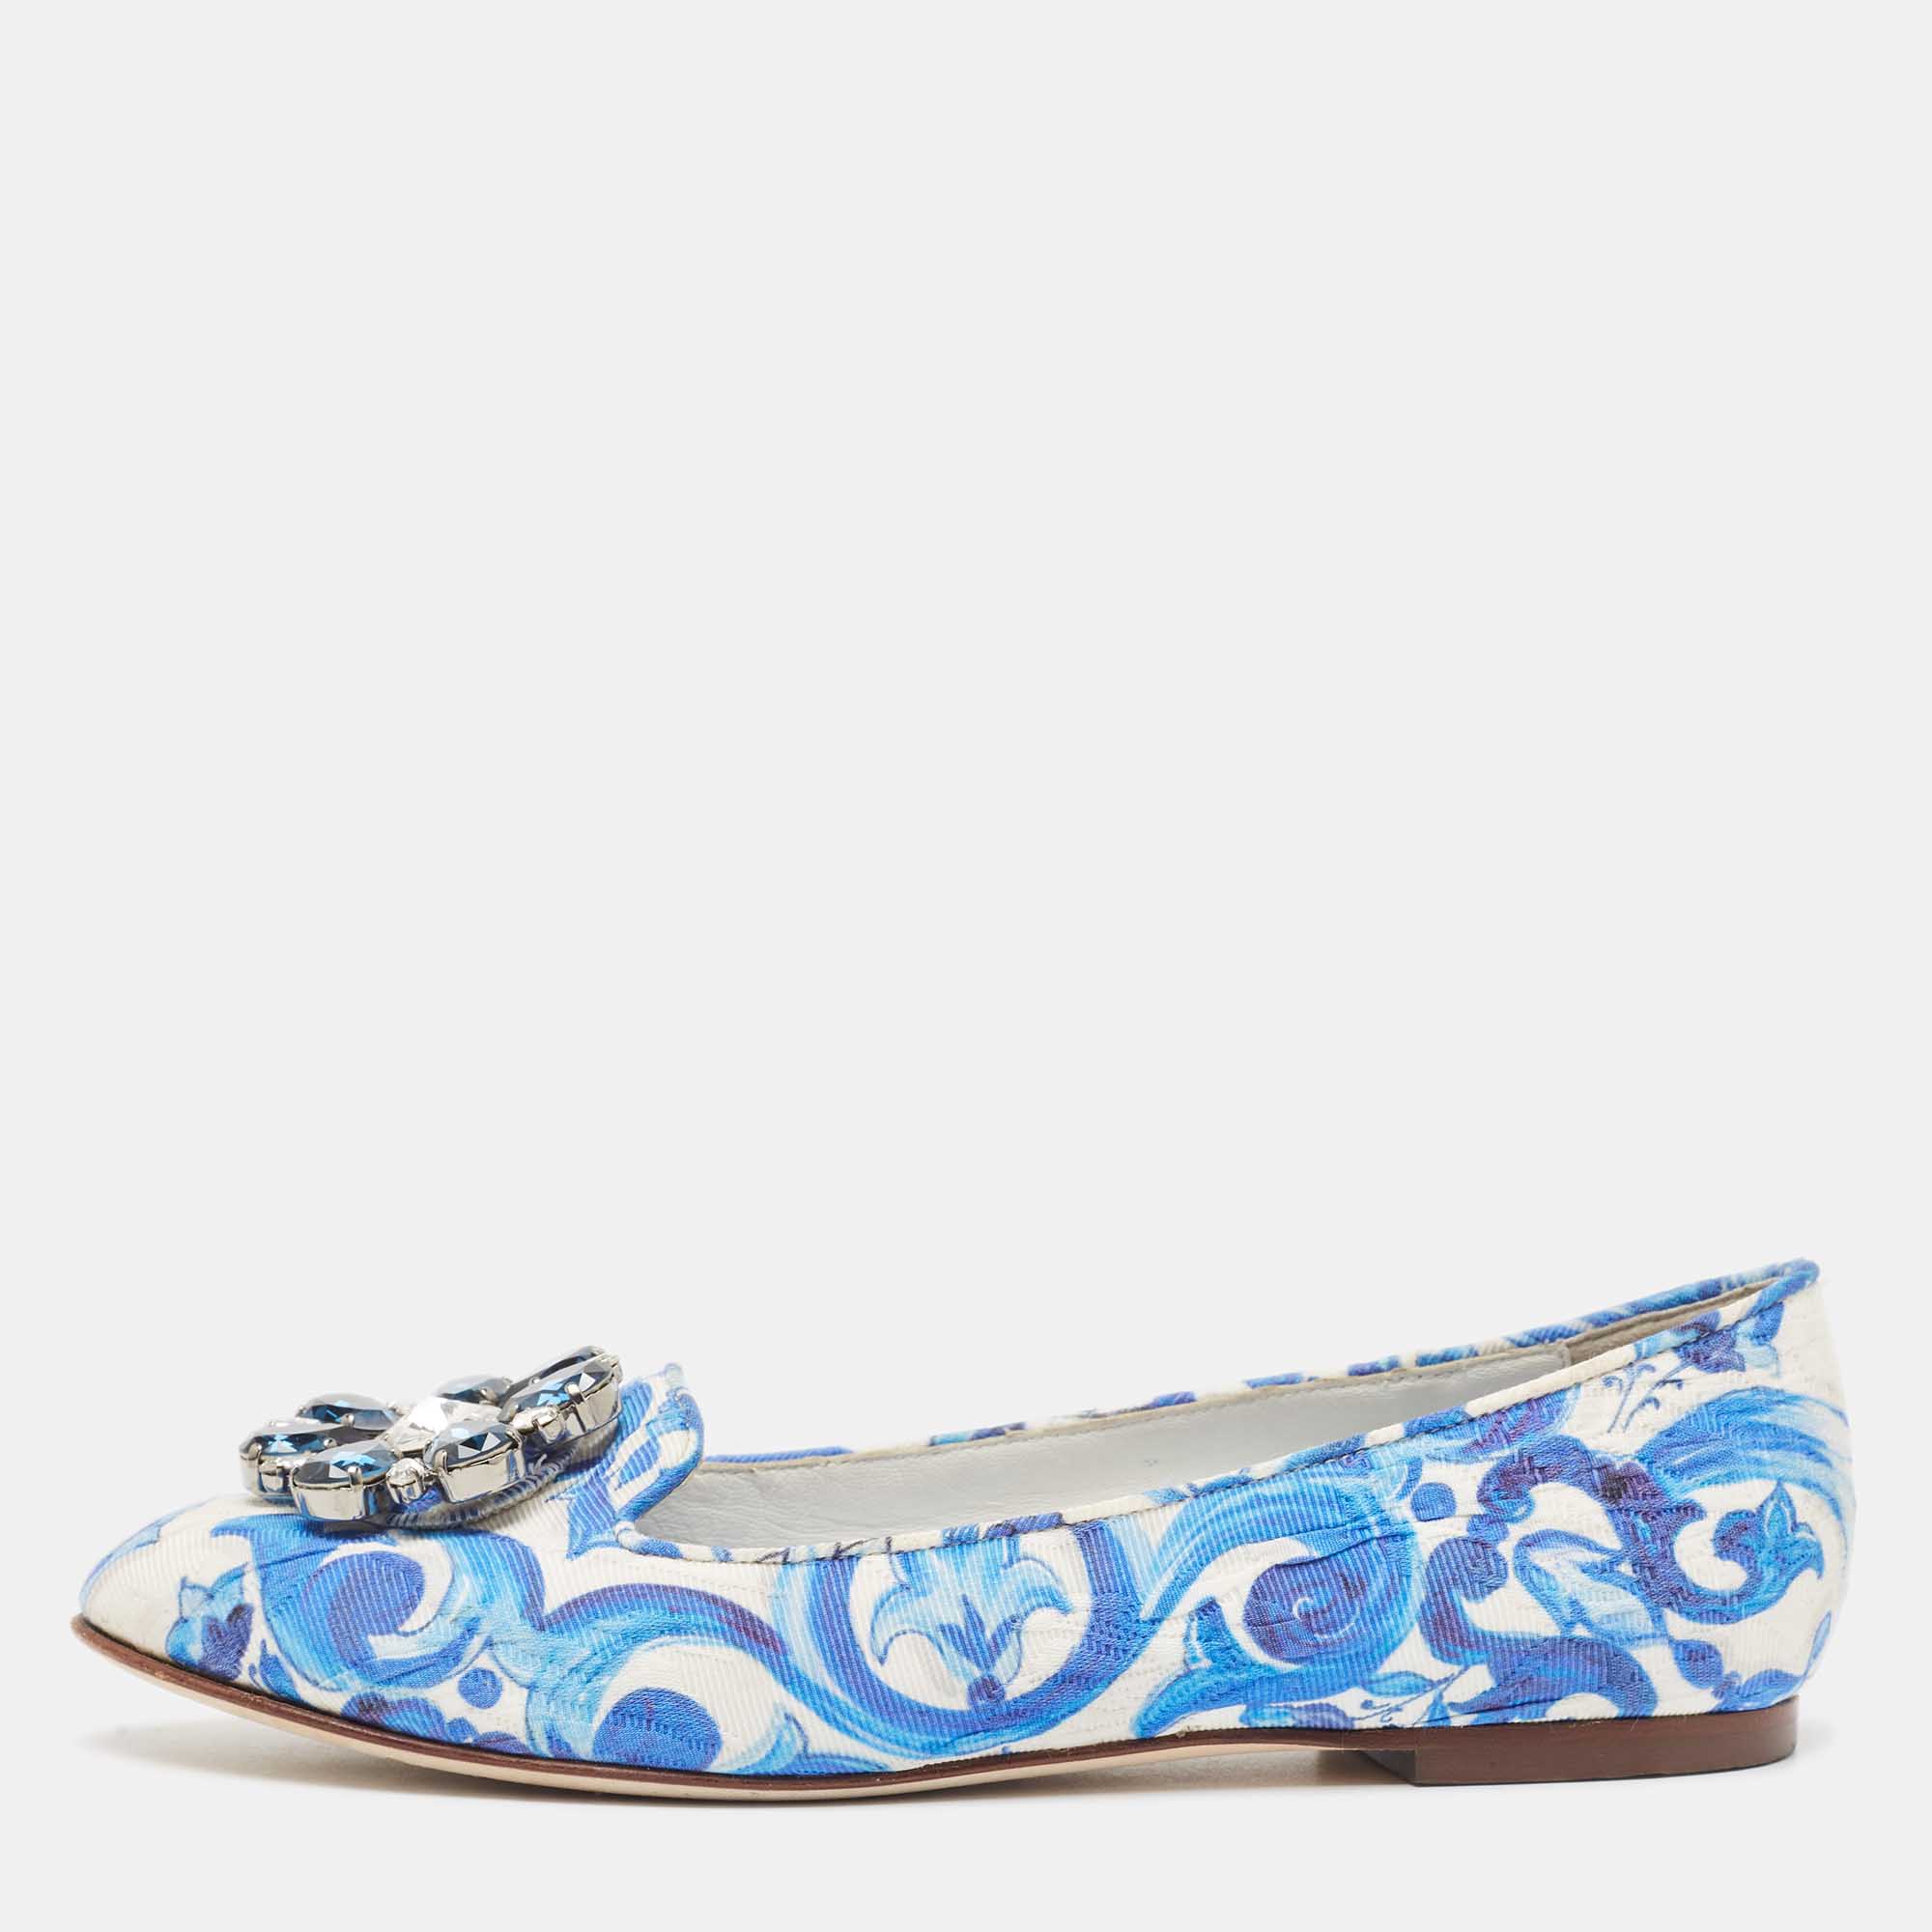 Pre-owned Dolce & Gabbana White/blue Printed Fabric Taormina Ballet Flats Size 36